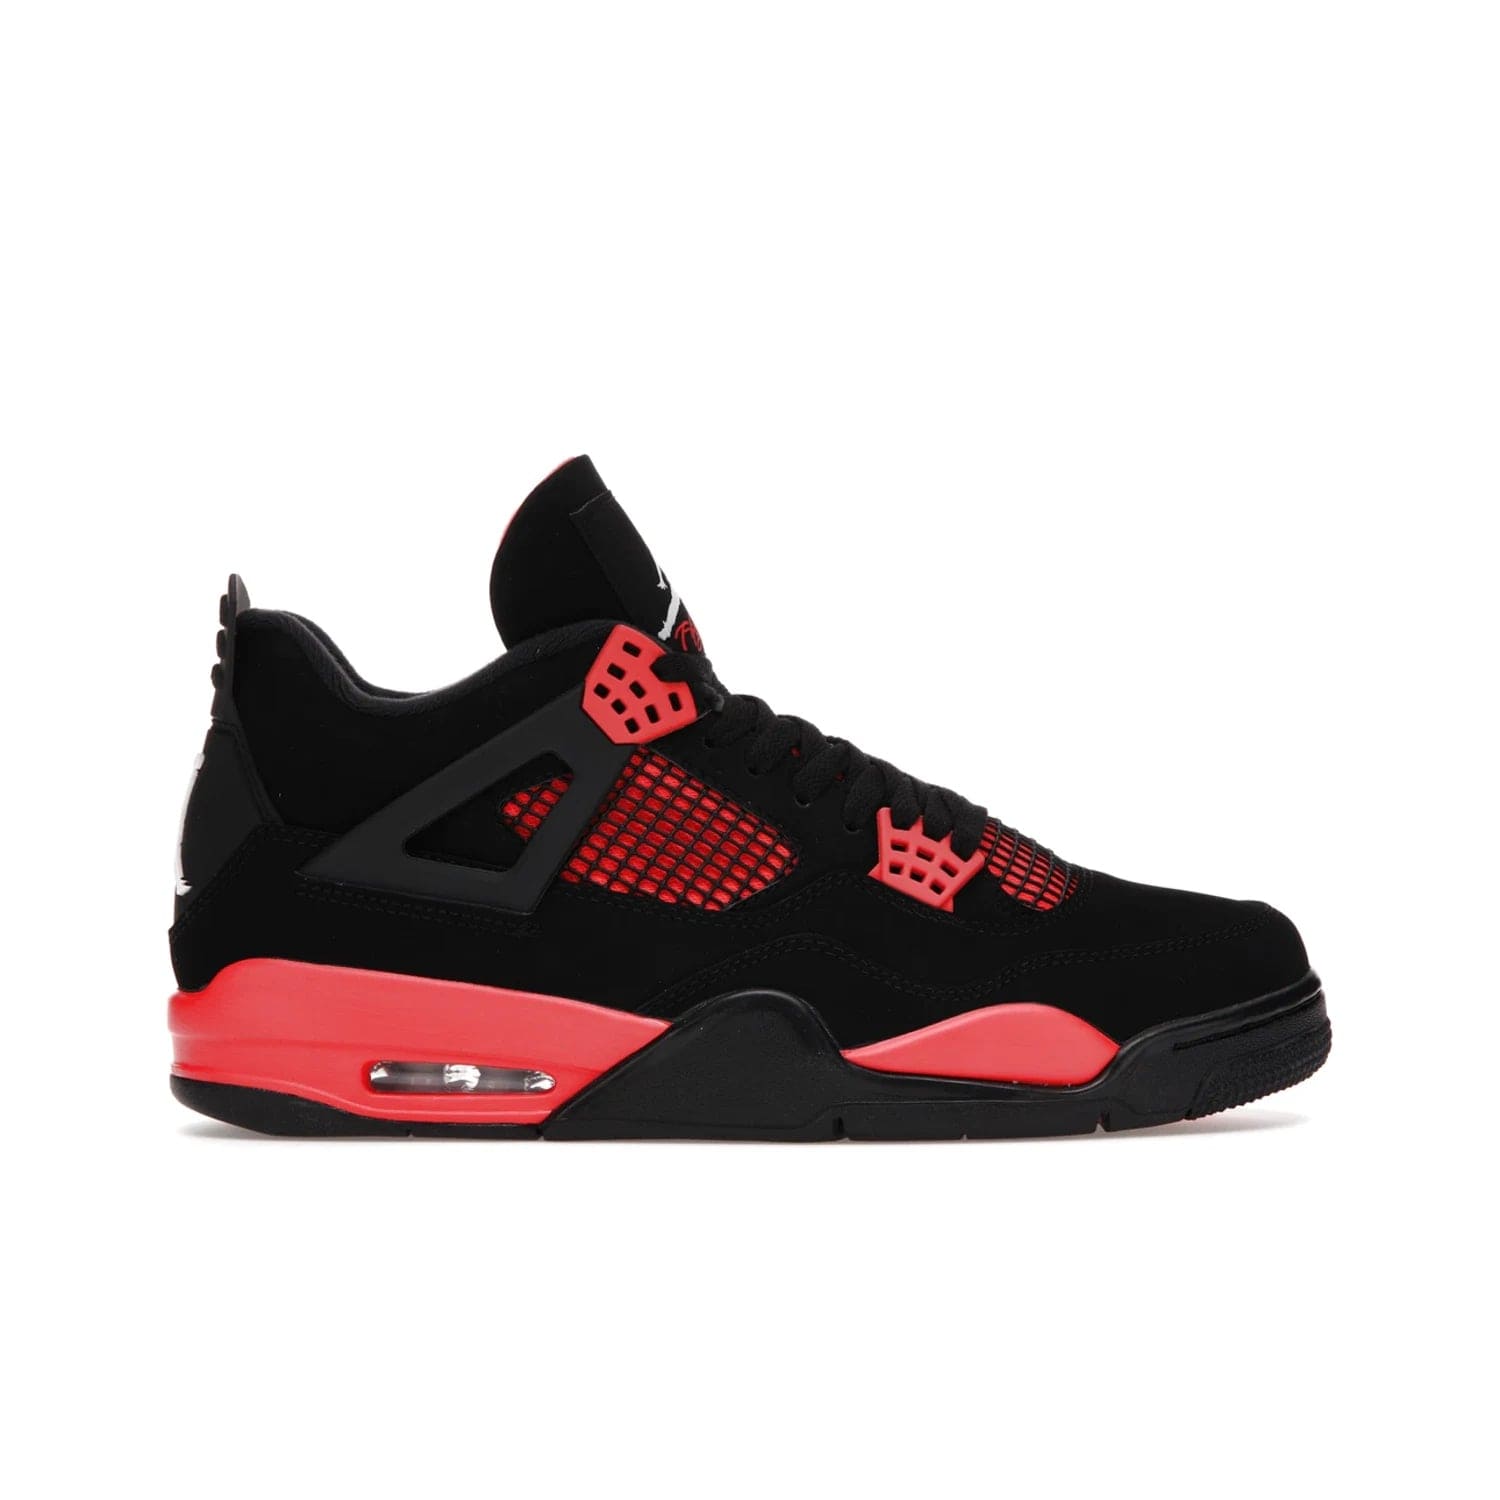 Jordan 4 Retro Red Thunder - Image 1 - Only at www.BallersClubKickz.com - Upscale your footwear with the Air Jordan 4 Retro Red Thunder. Featuring a Durabuck upper, red underlays, signature Flight patch, and vibrant red midsole, this retro sneaker adds style and edge. Releases in January 2022.